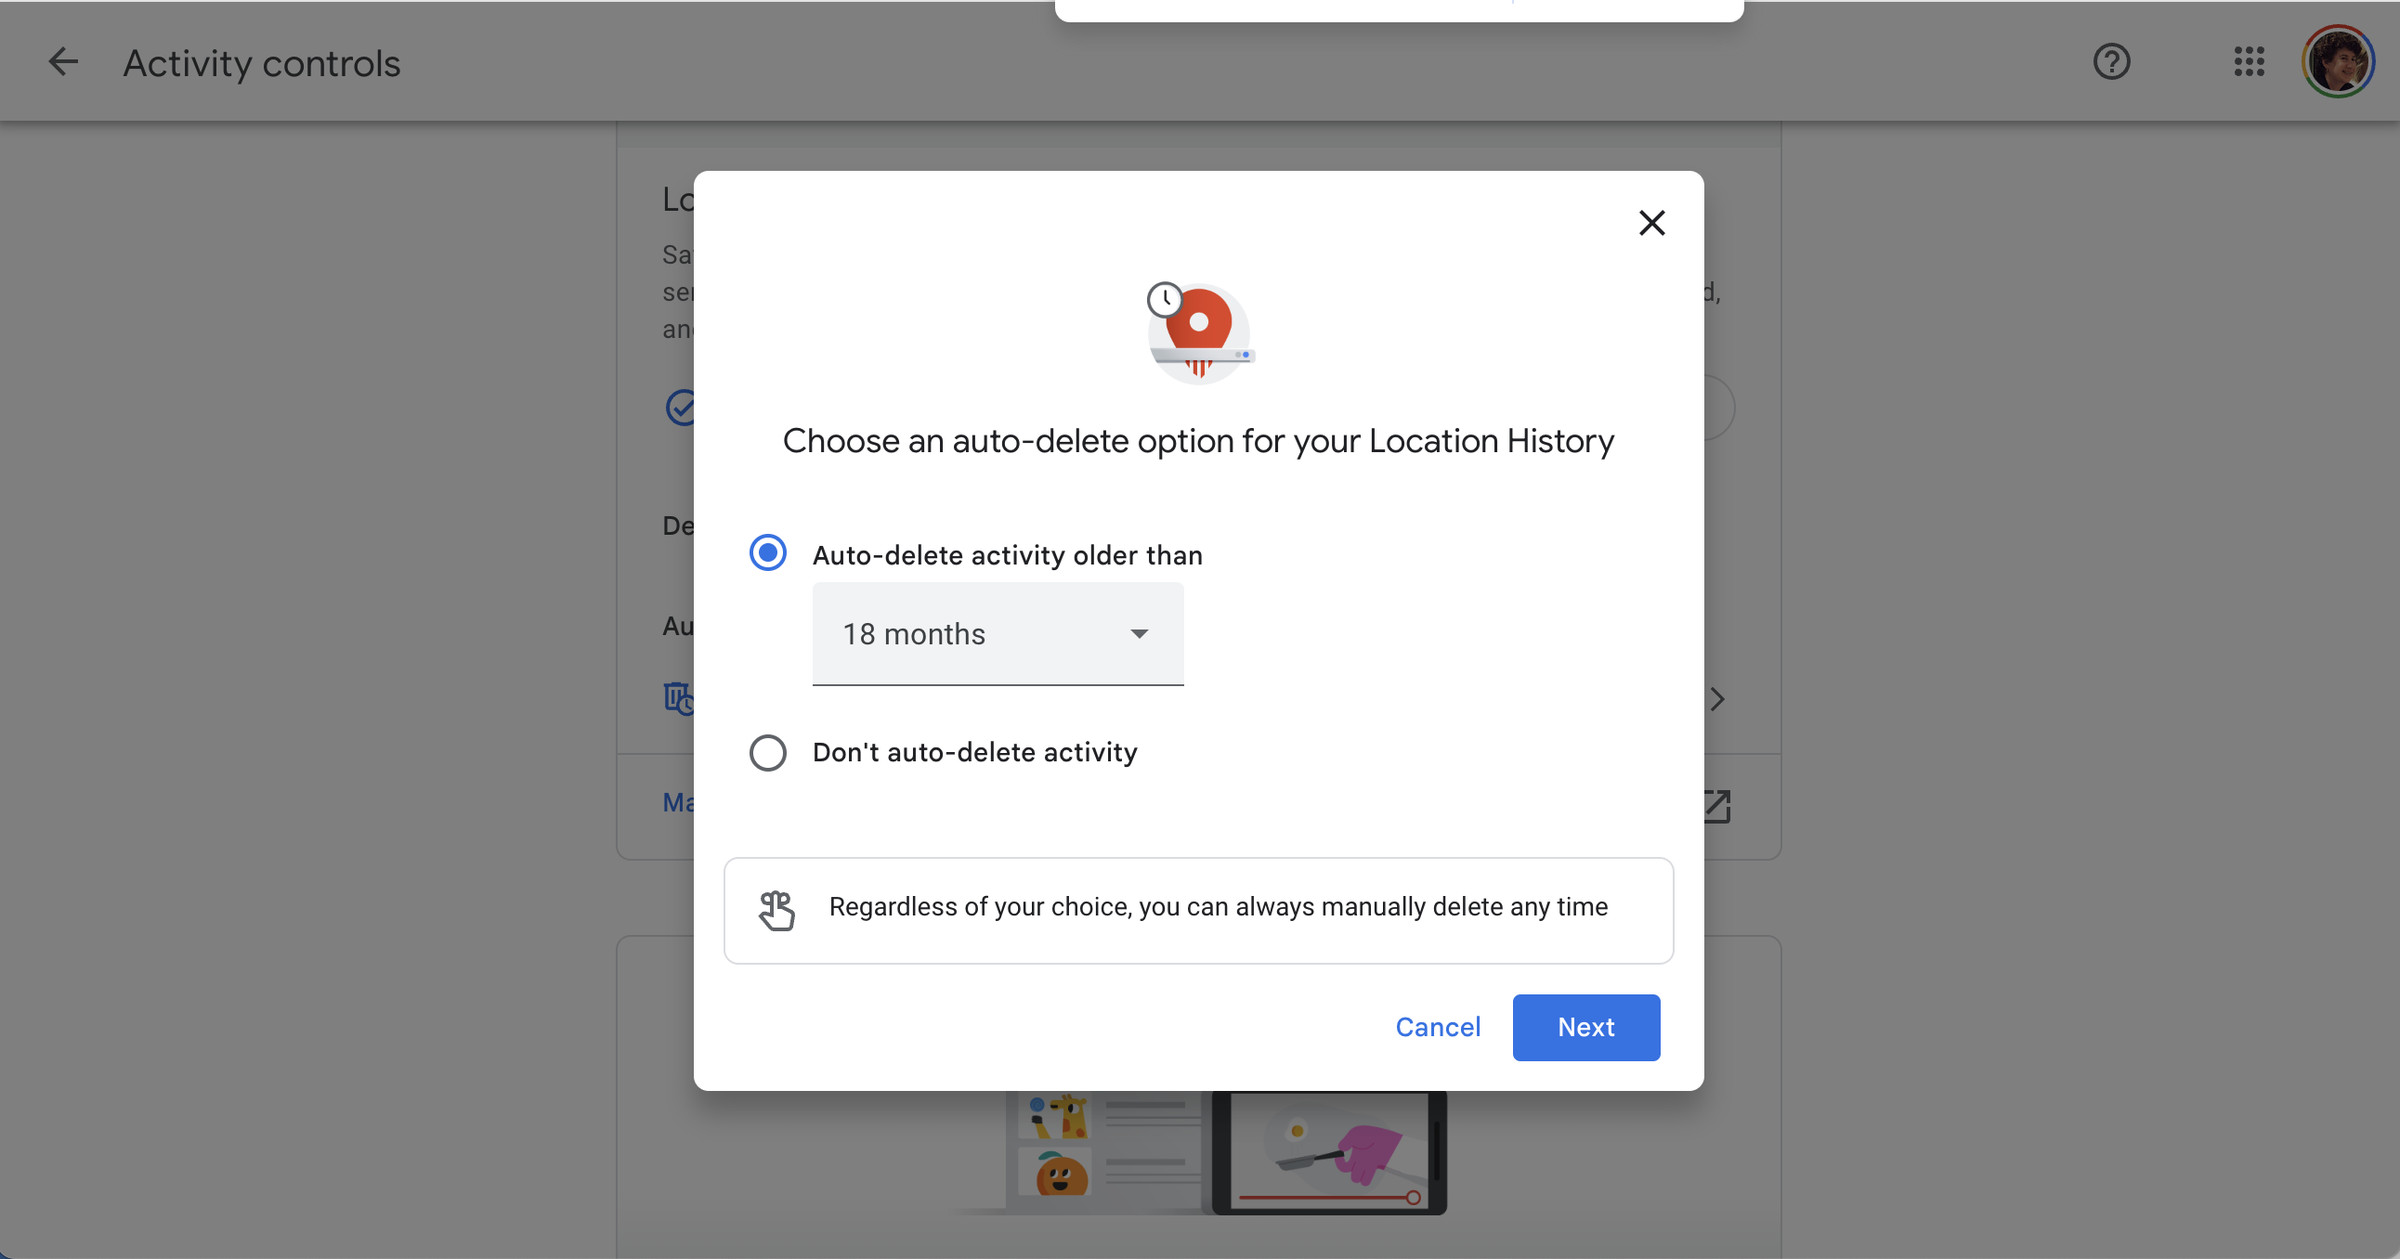 Pop-up headed “Choose an auot-delete option for your Location History.”